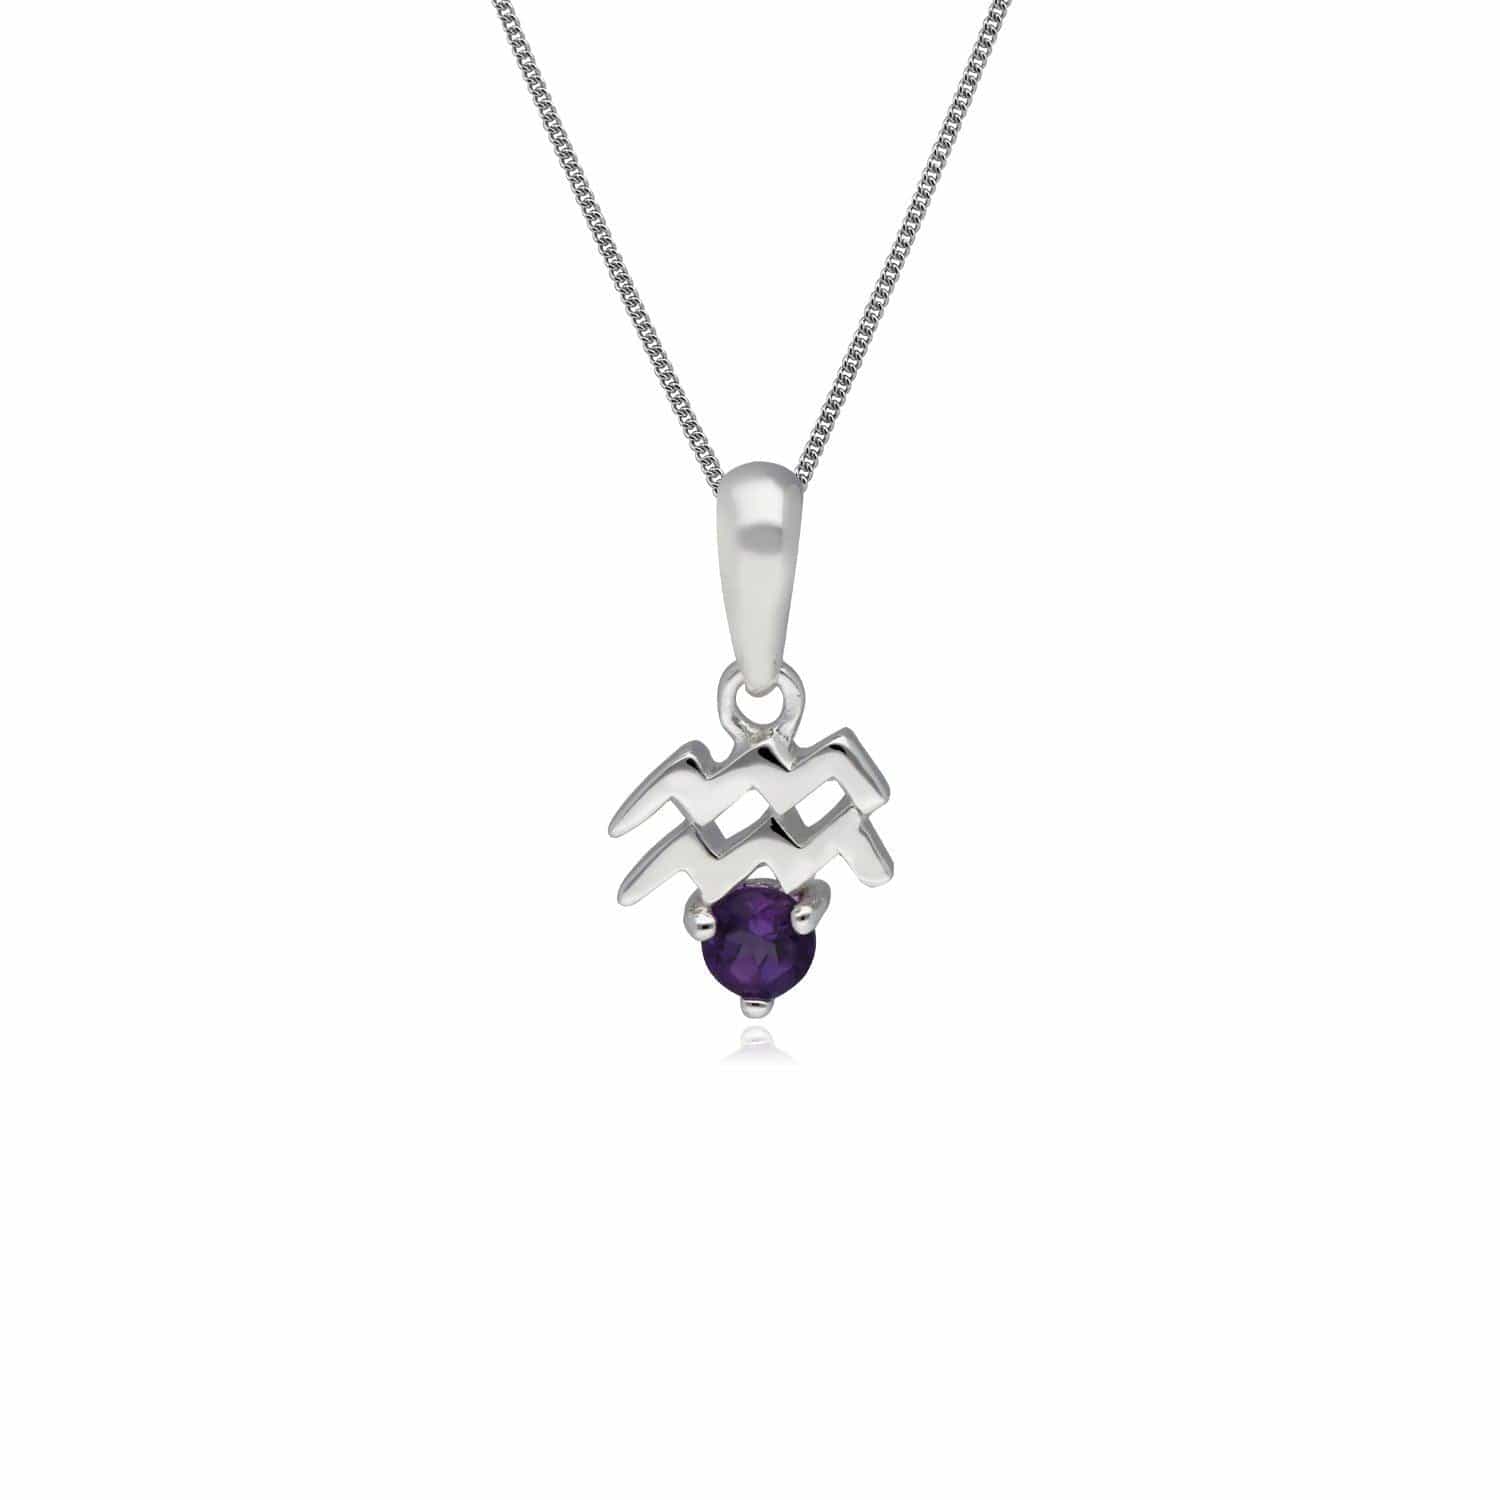 162P0232019 Amethyst Aquarius Zodiac Charm Necklace in 9ct White Gold 1